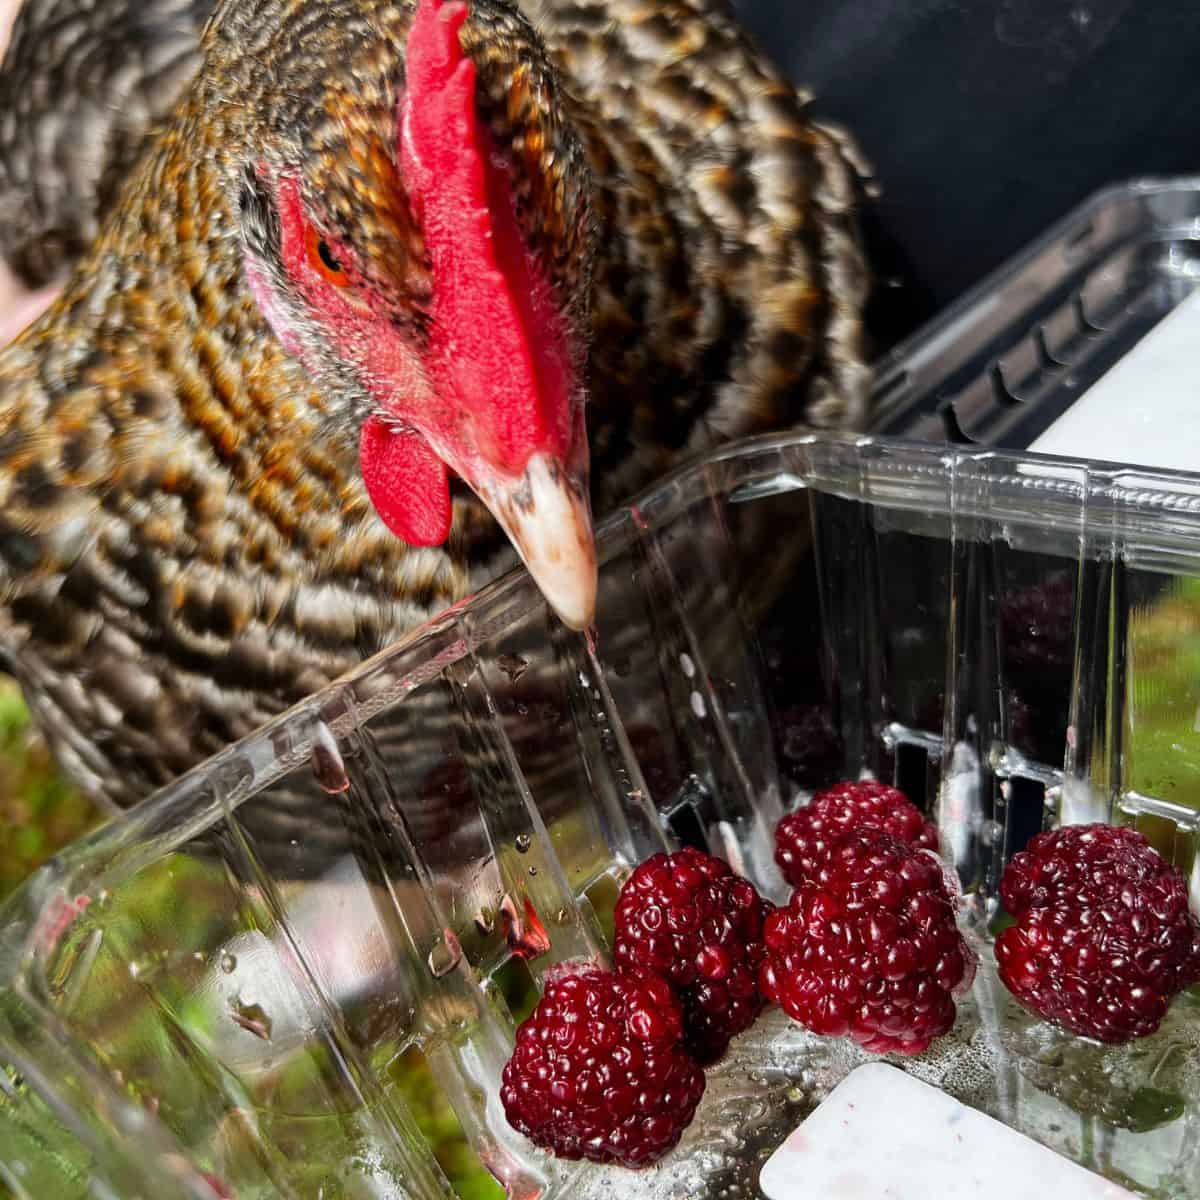 Chicken being held next to a container of raspberries.